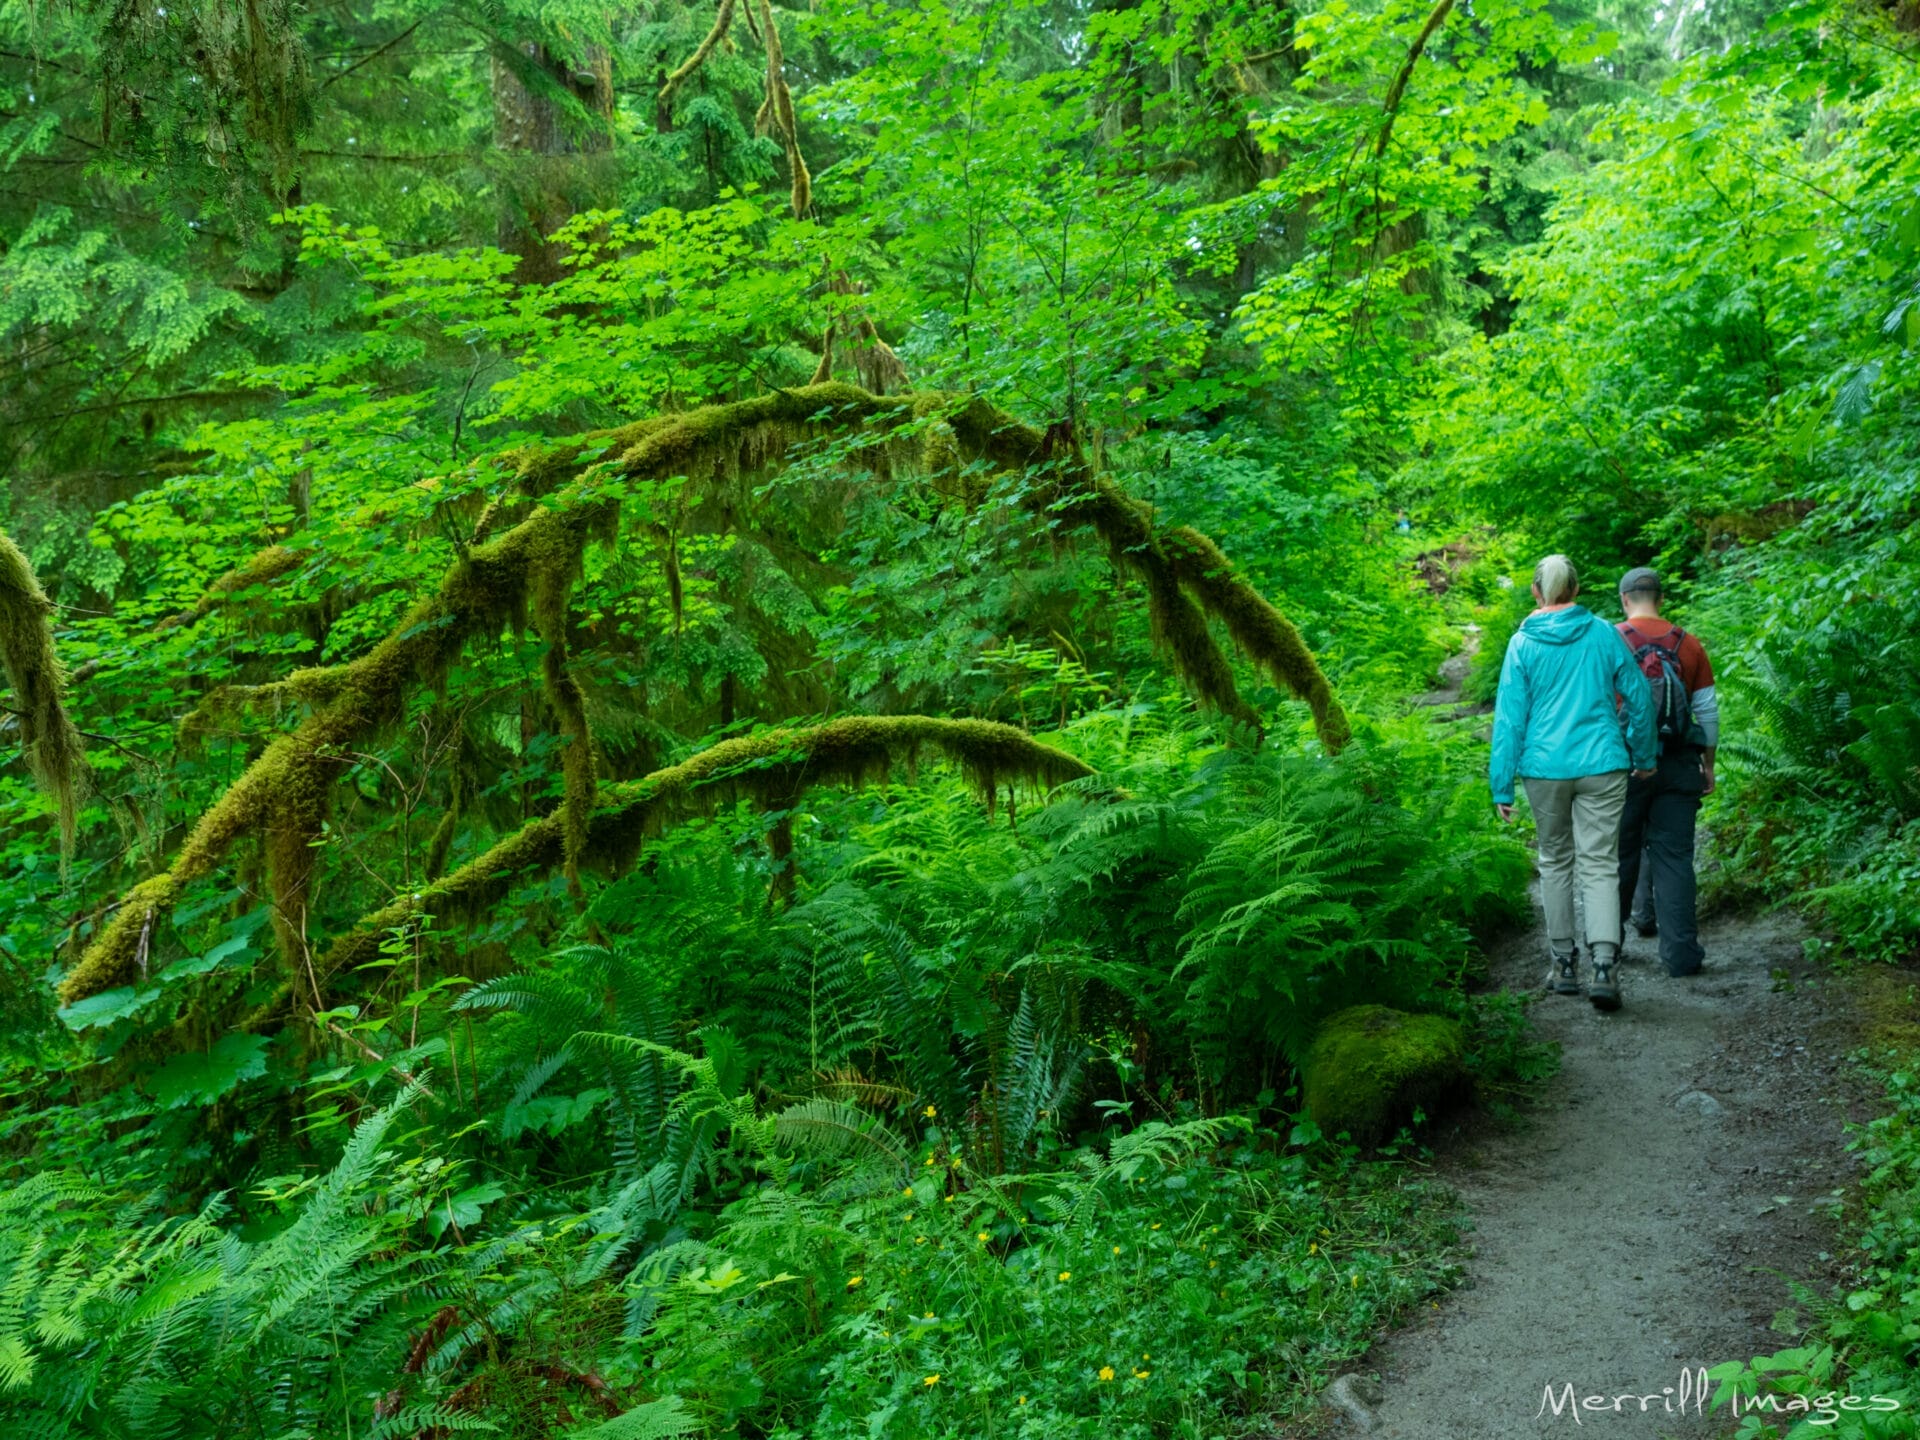 Two people hiking in a lush wooded landscape